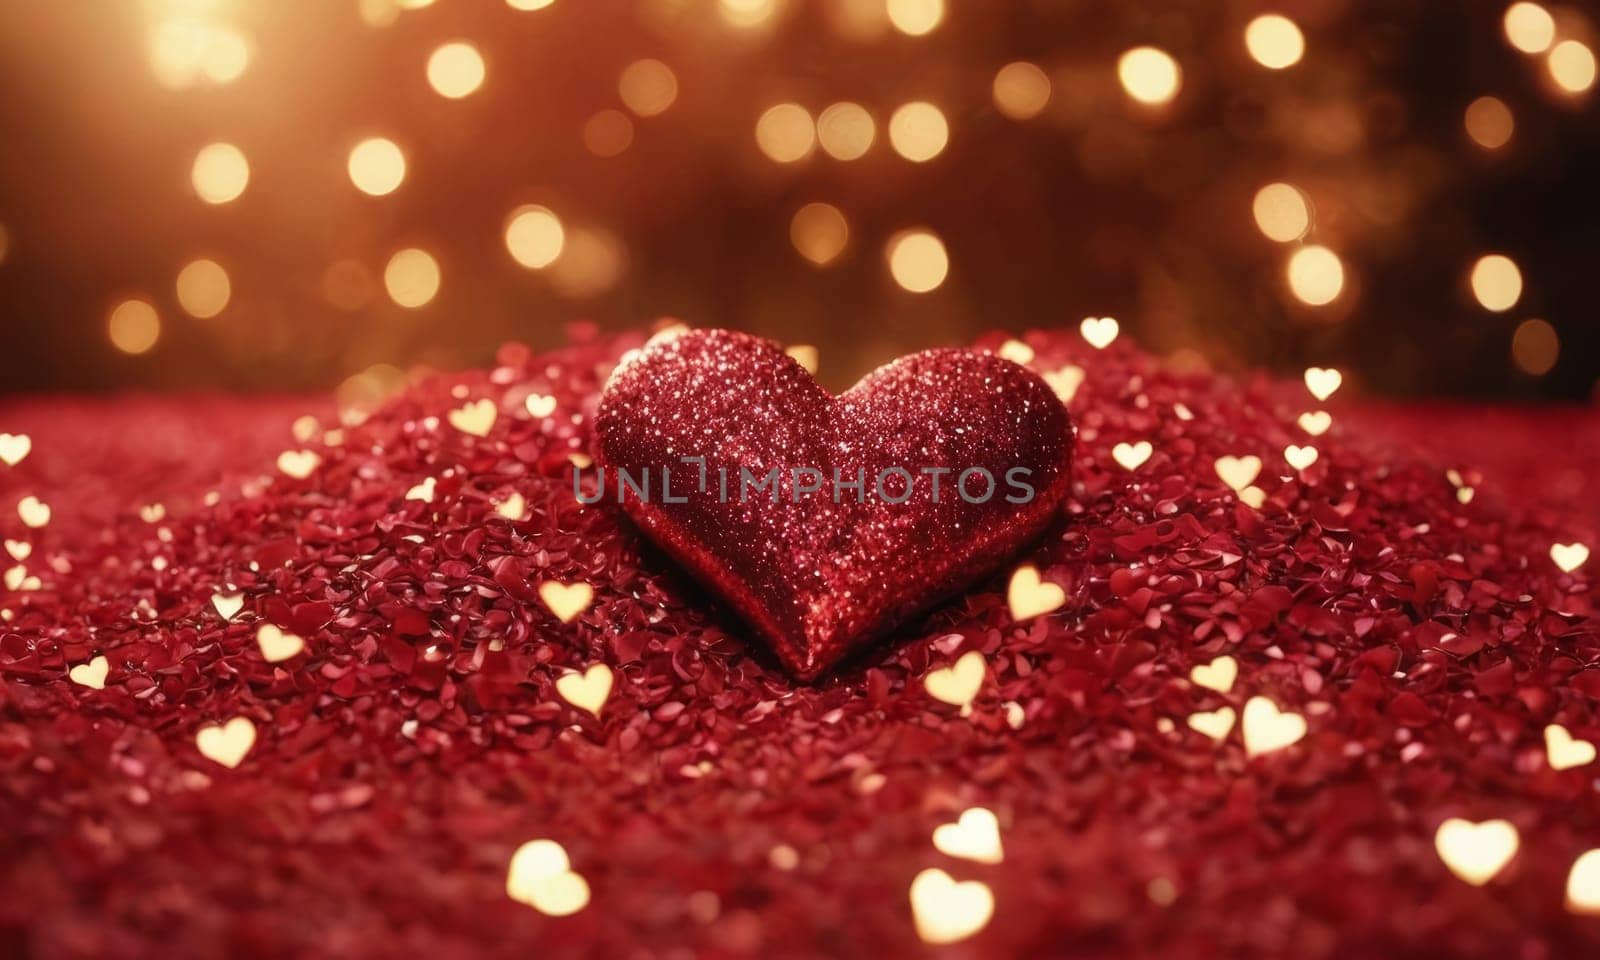 Glistening hearts rest amidst a shower of smaller heart shapes. The radiant glow and the deep red hue evoke a sense of warmth and affection. Ideal for expressing love and romance. Valentine's Day